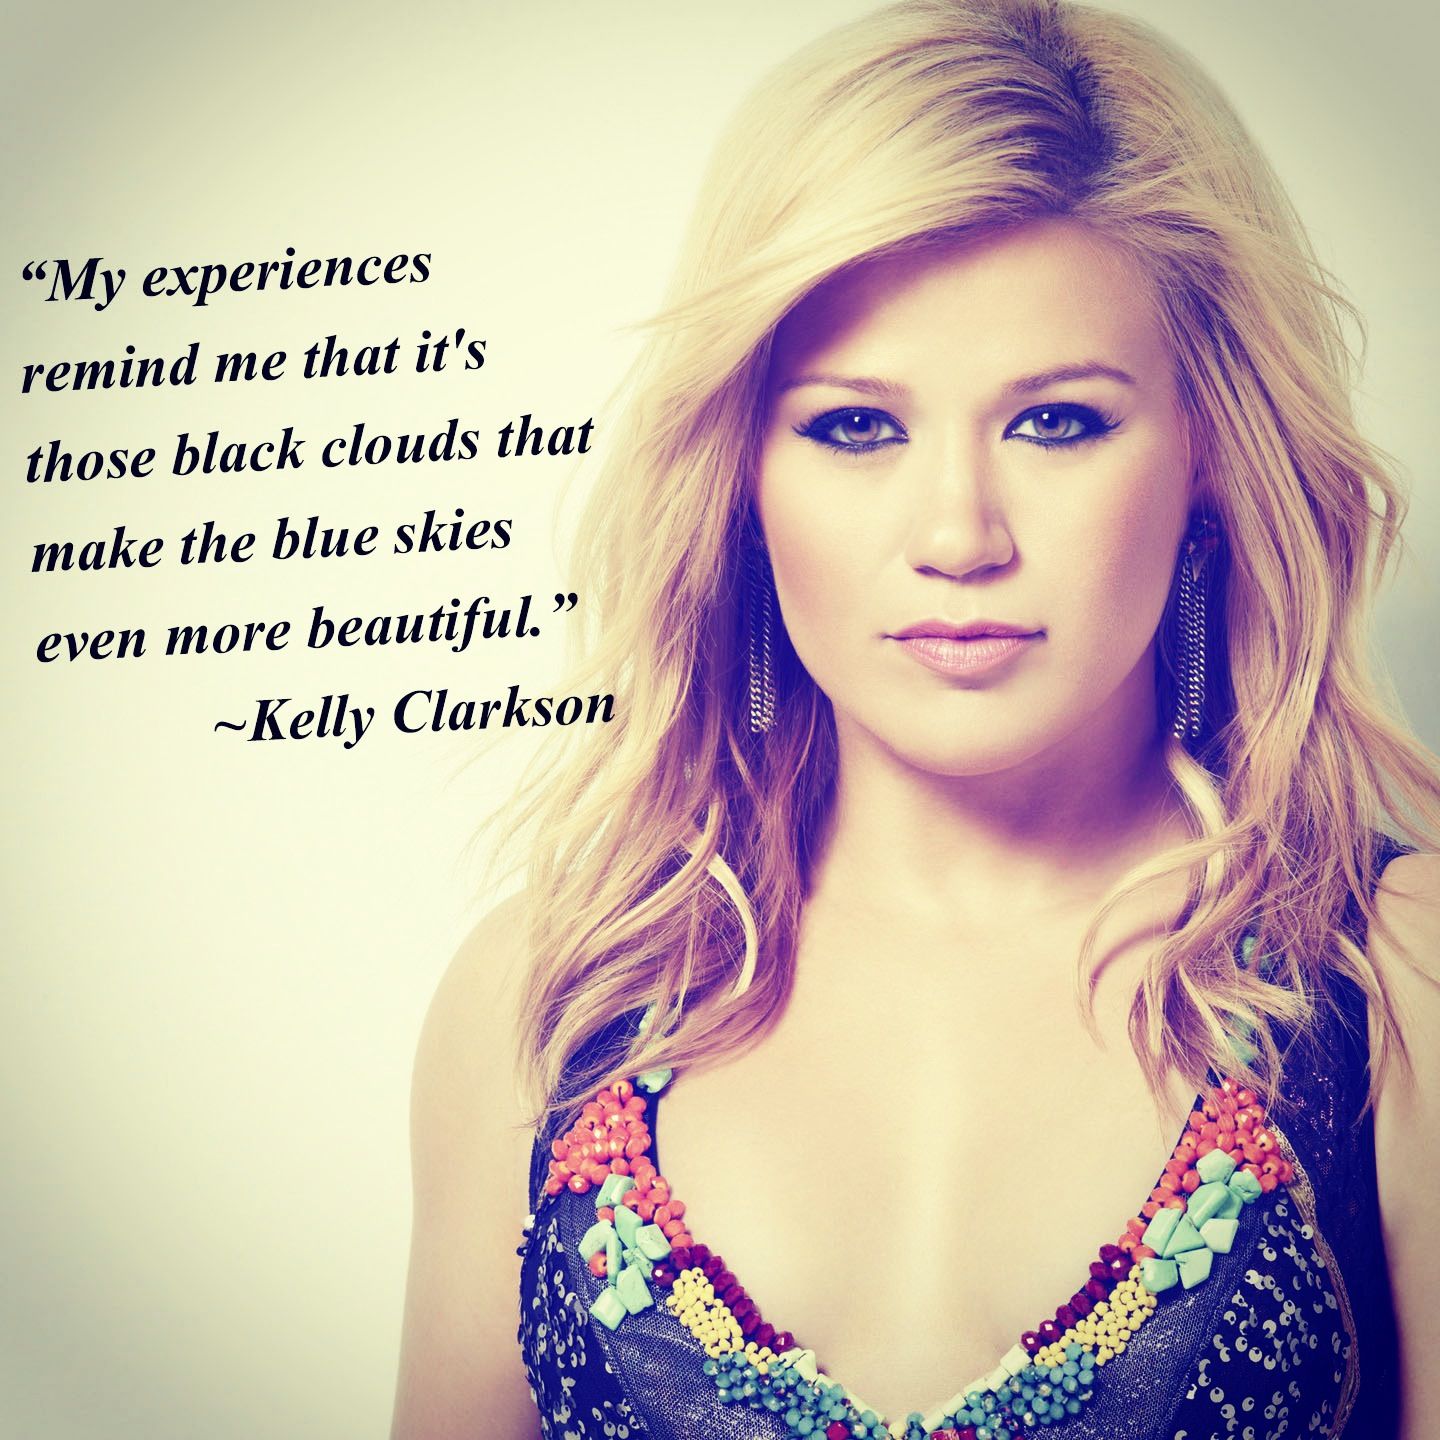 5 Famous Kelly Clarkson Quotes